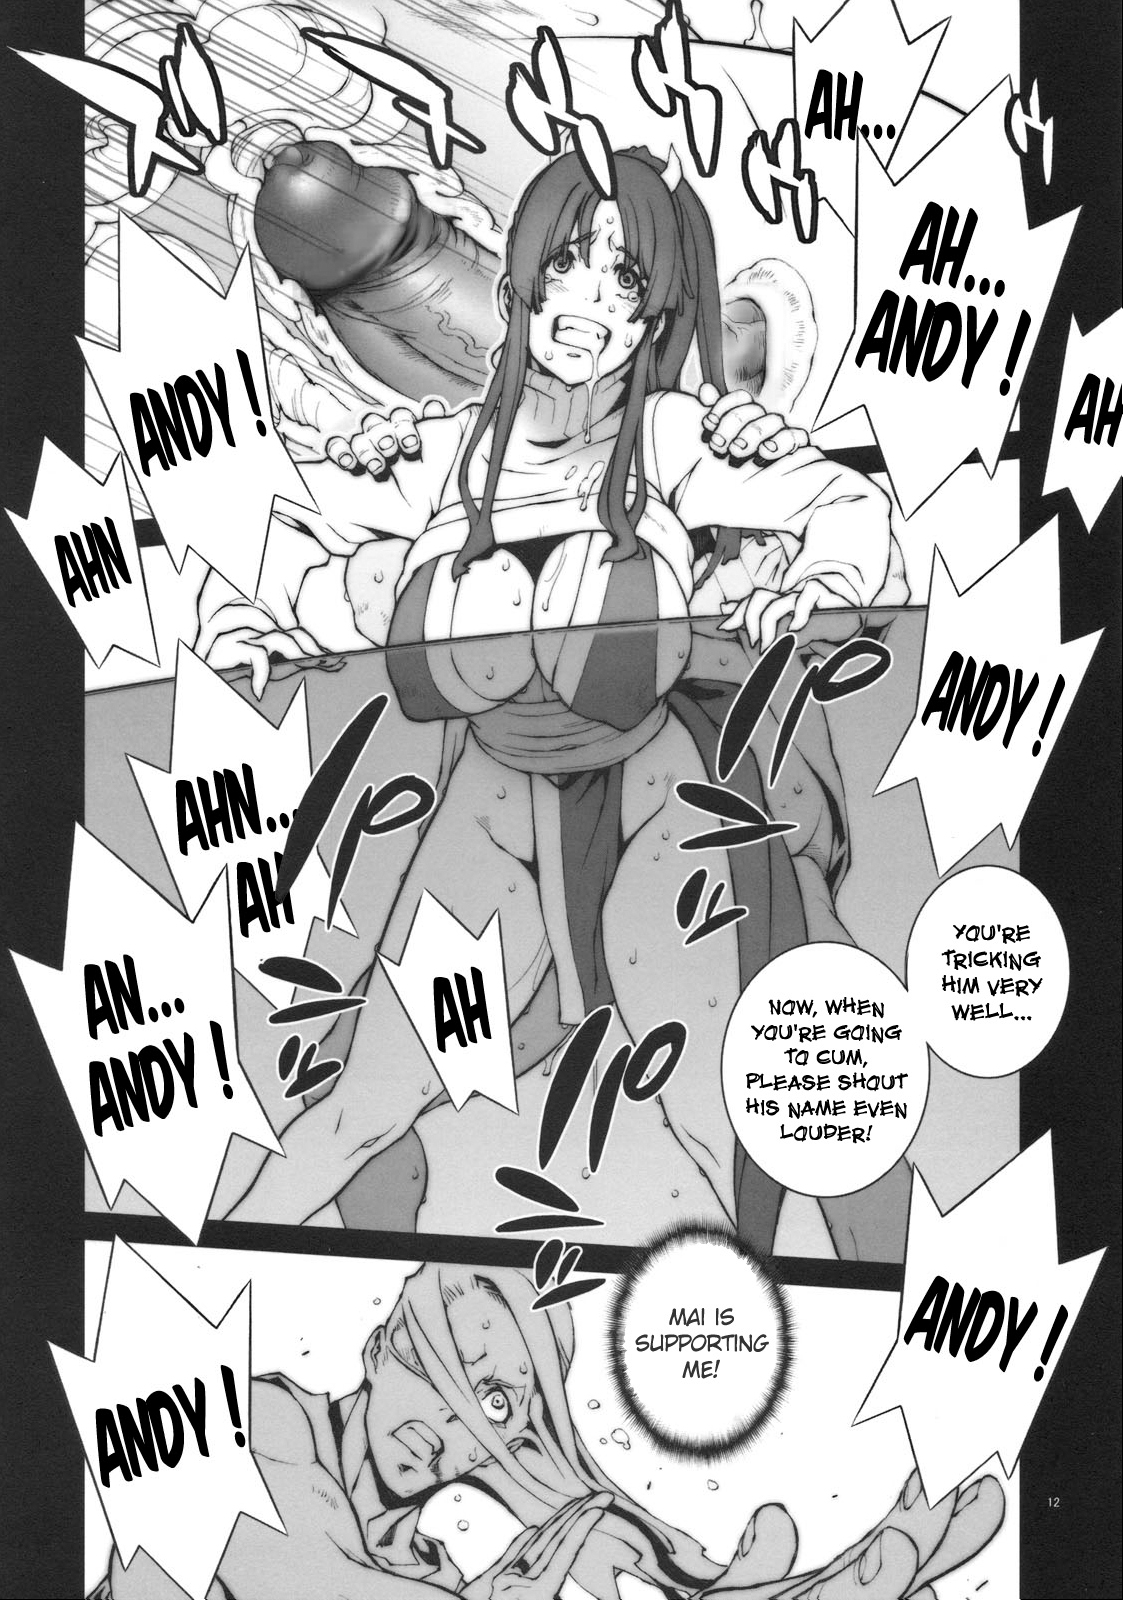 (COMIC1☆4) [P-collection (Nori-Haru)] Kachousen (King of Fighters) [English] [Funeral of Smiles] [Decensored] page 13 full